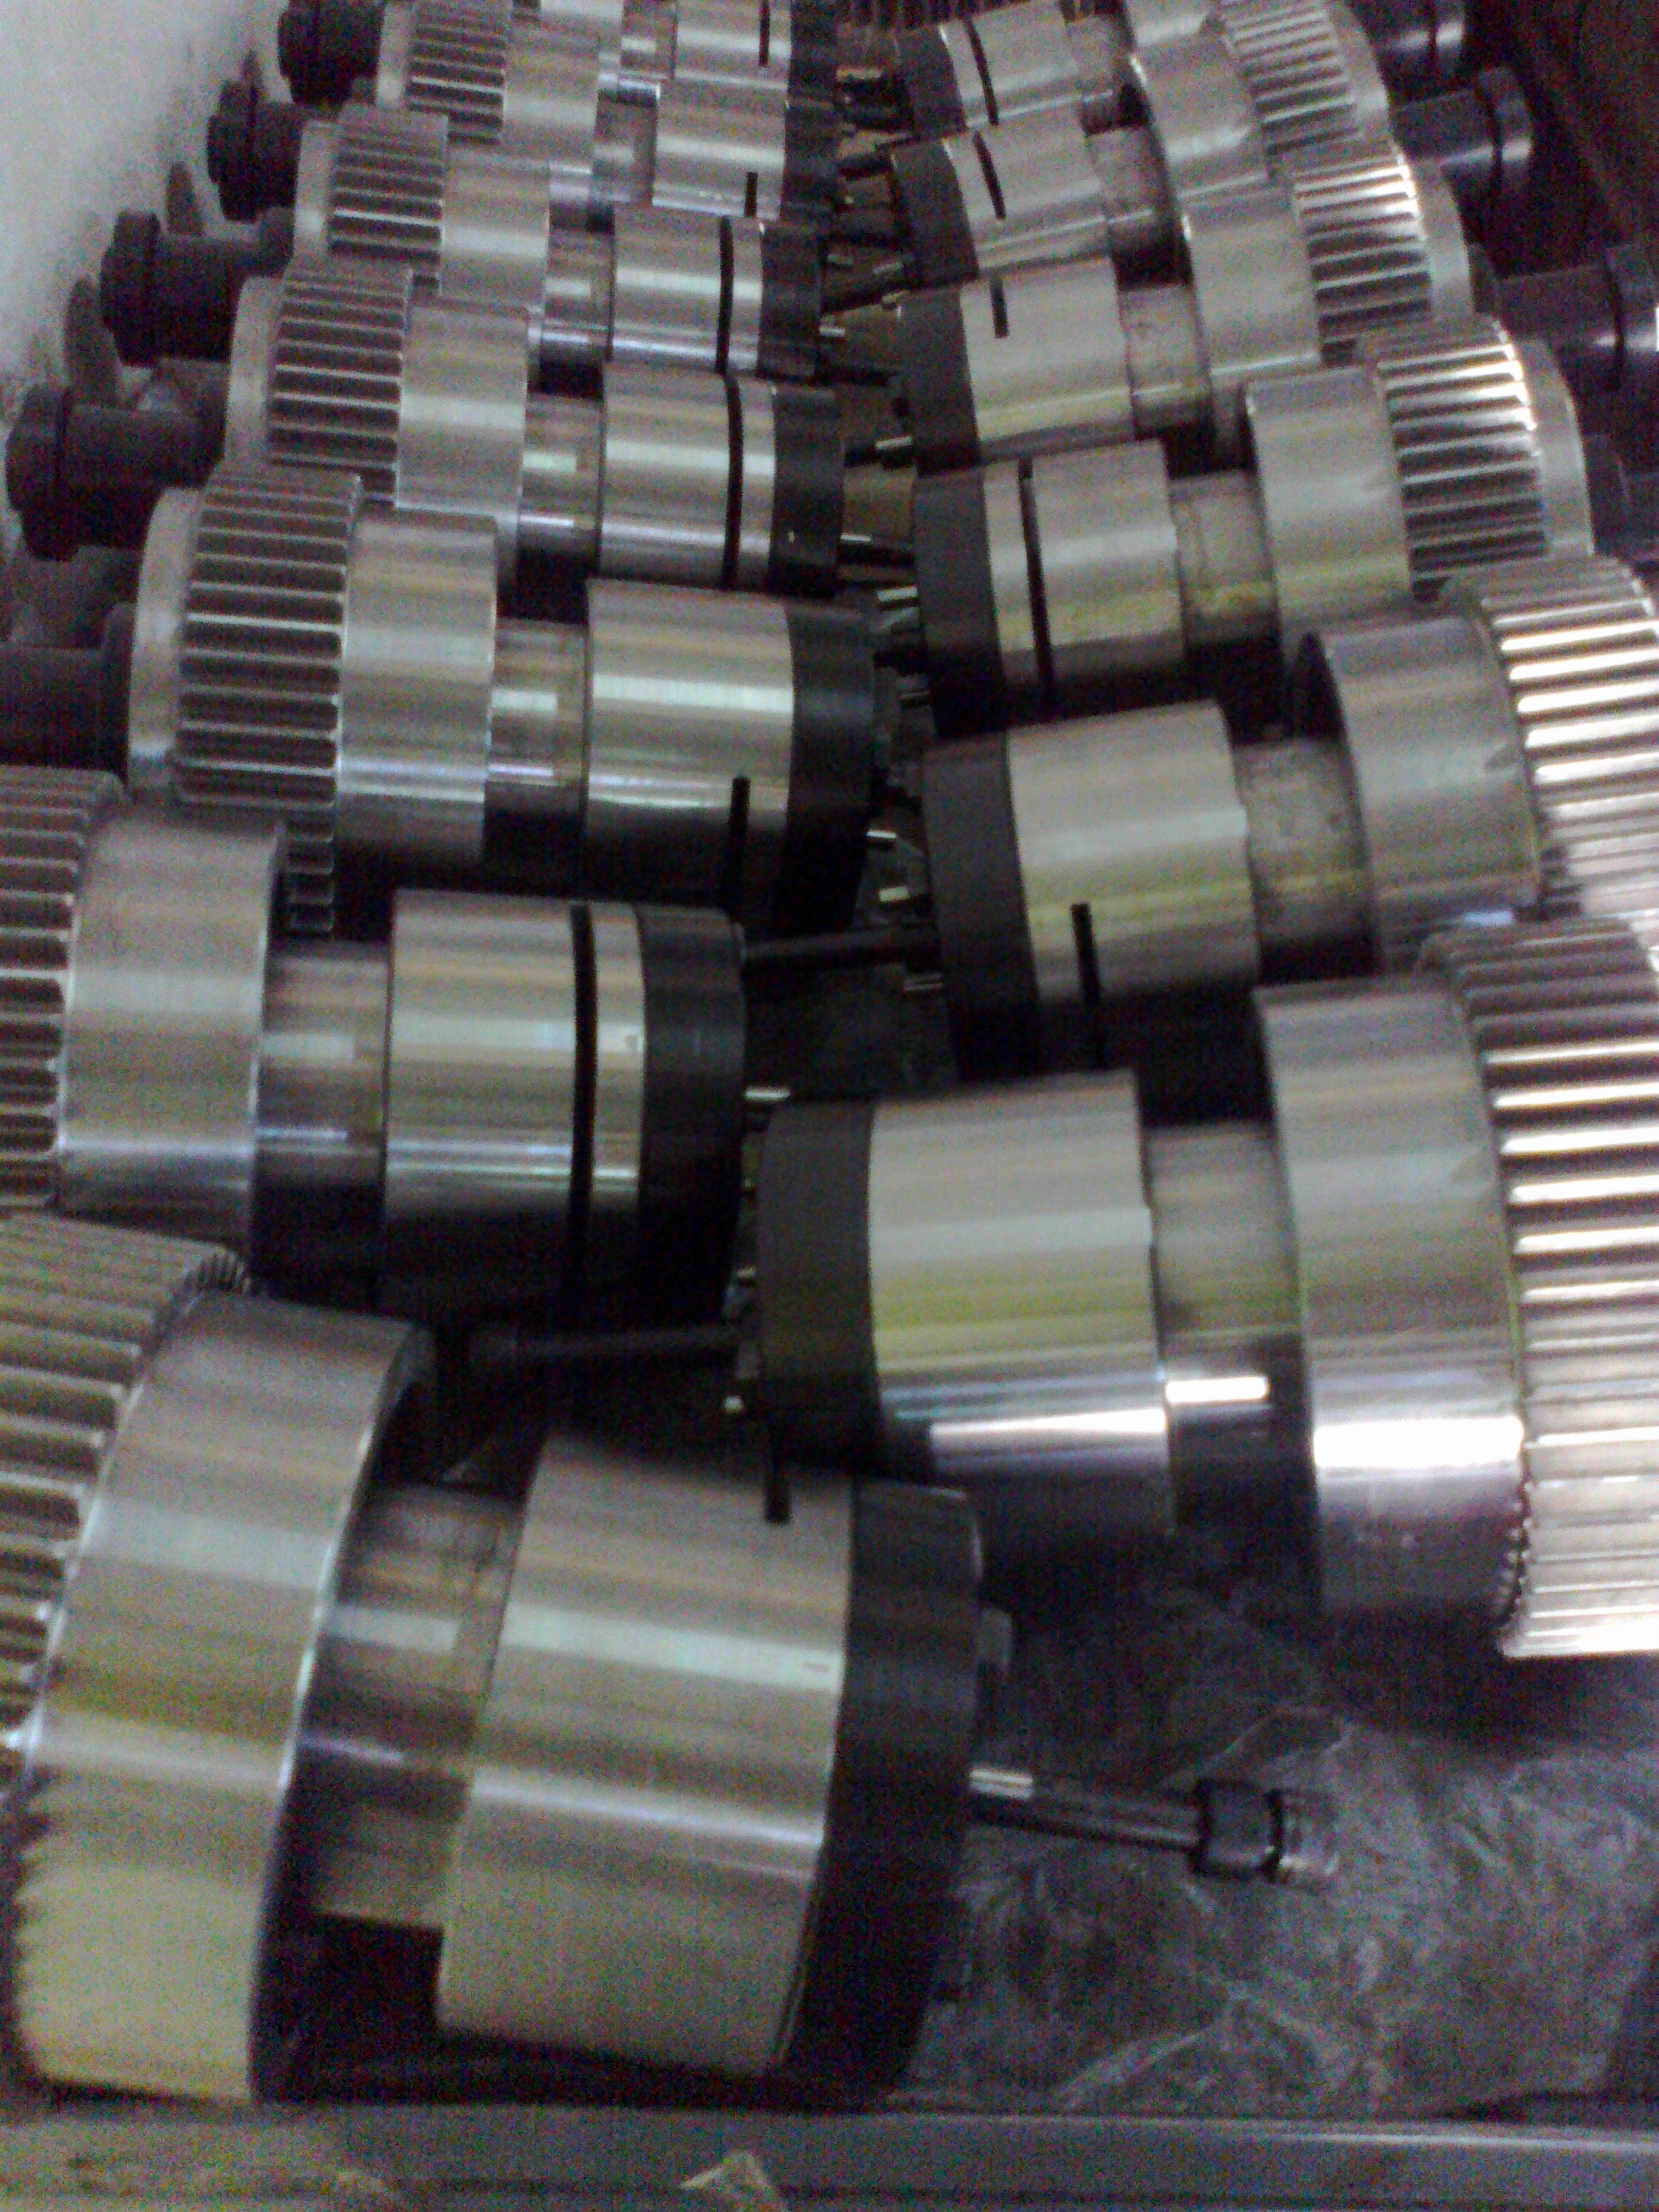 Grinding Gear Assembly